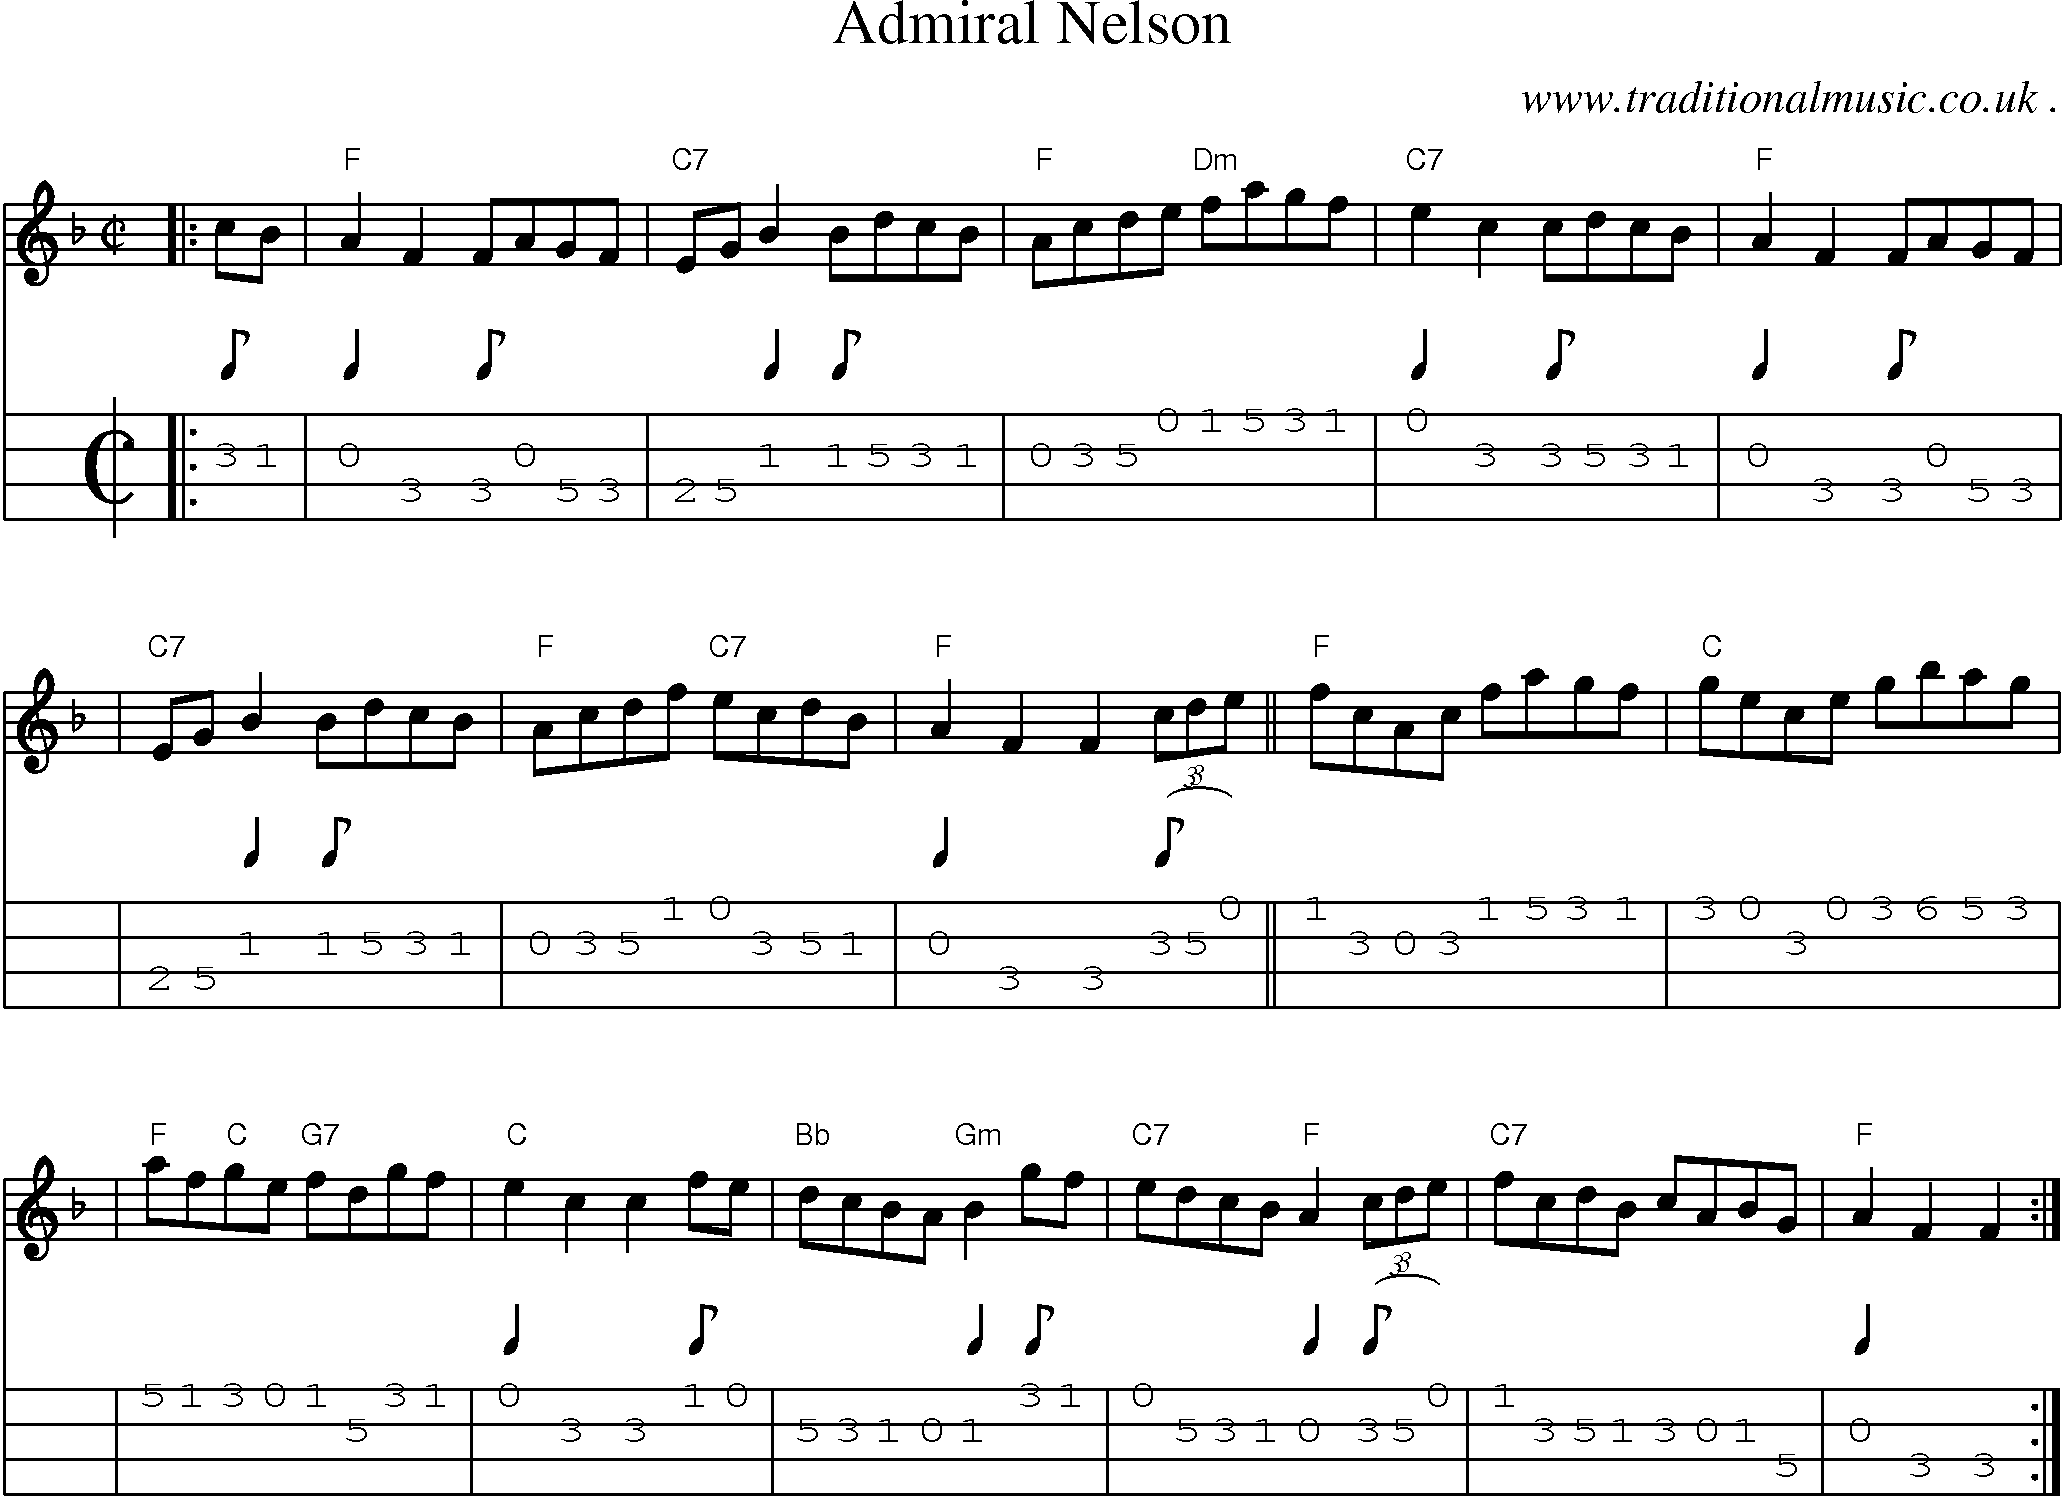 Sheet-music  score, Chords and Mandolin Tabs for Admiral Nelson